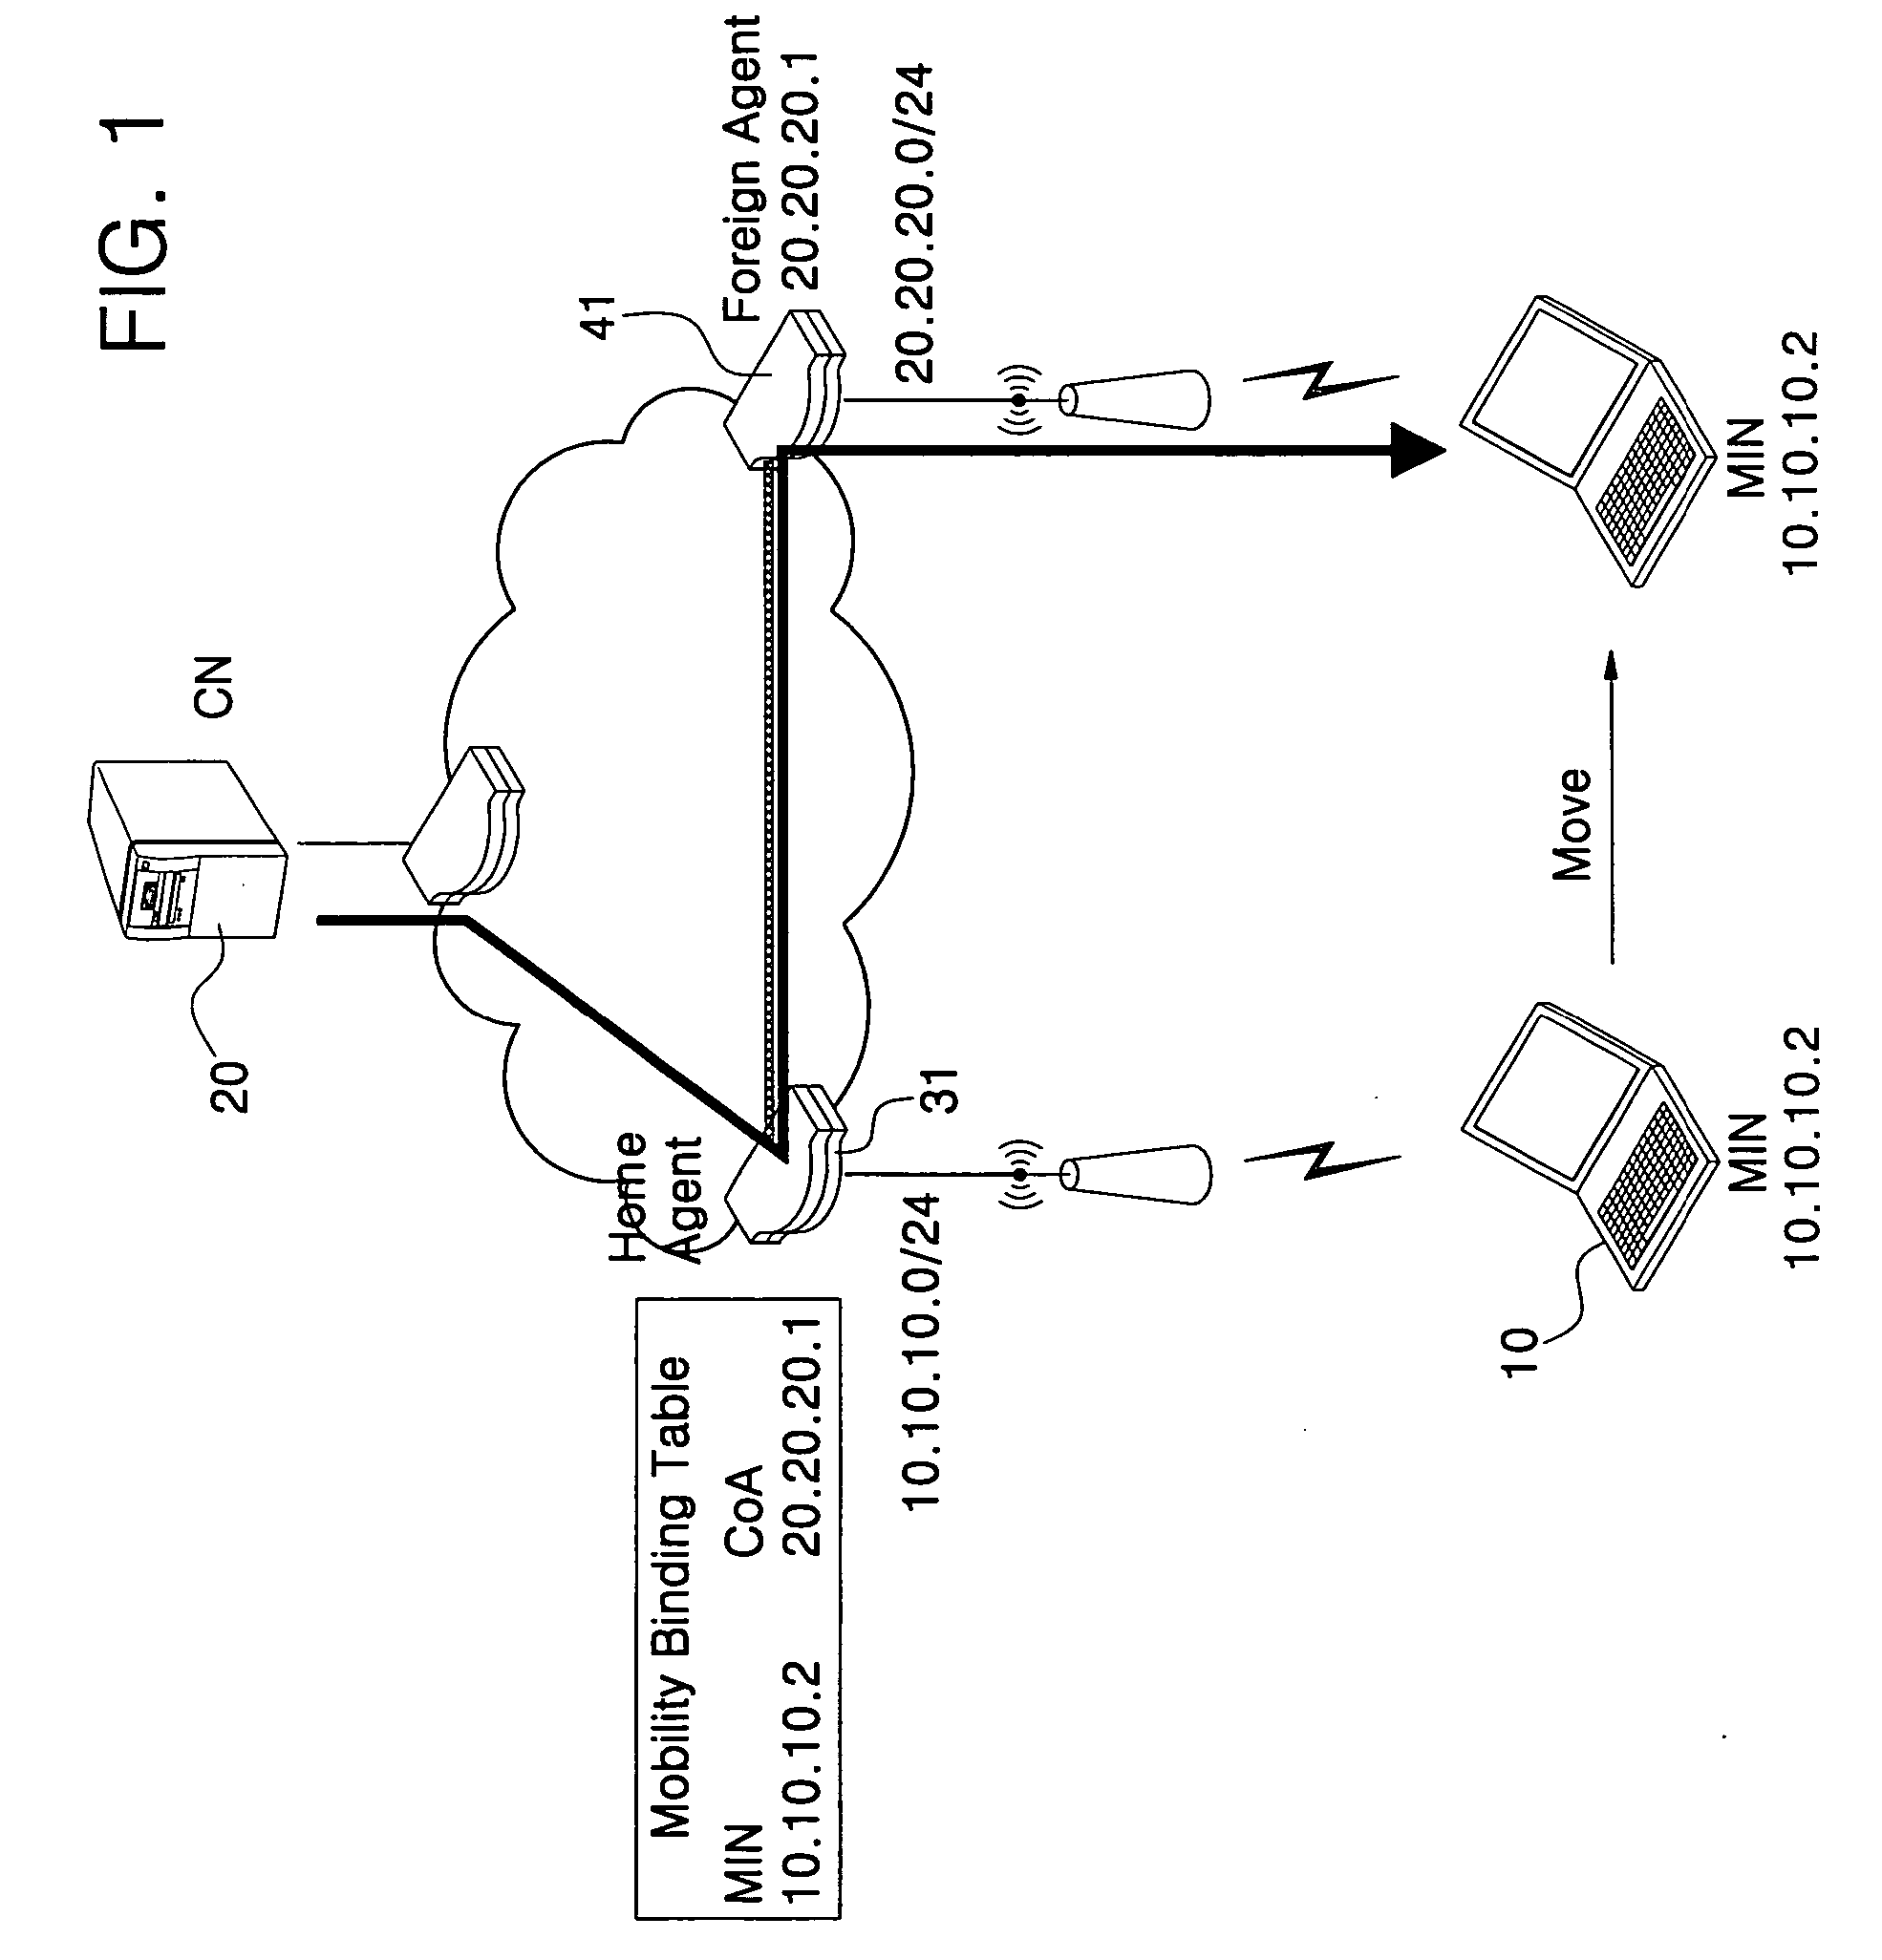 Multi-protocol label switching (MPLS) network and method of applying a mobile Internet protocol (IP) to MPLS network